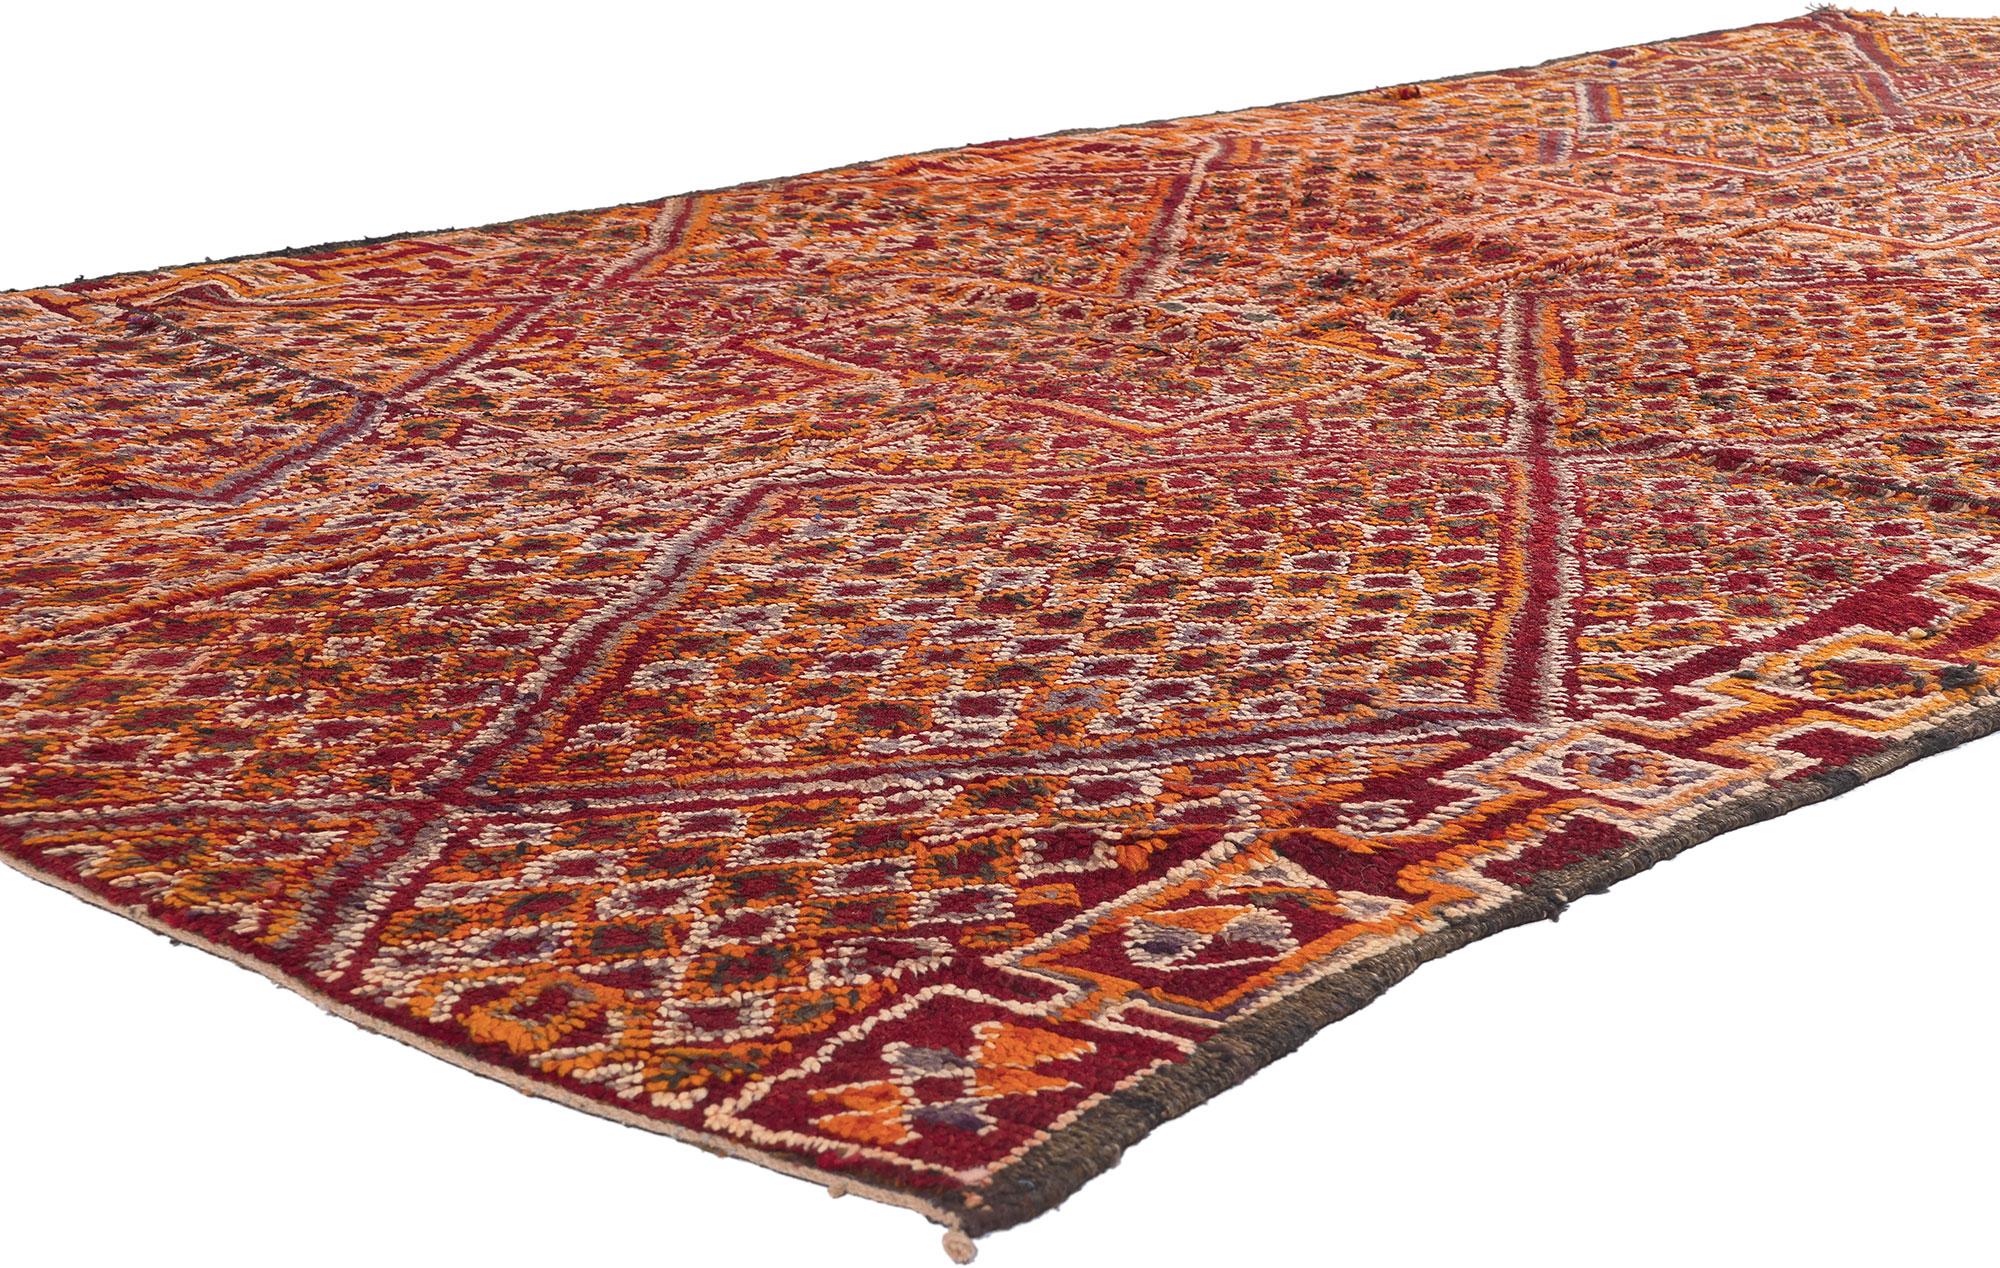 21264 Vintage Orange Beni MGuild Moroccan Rug, 05'08 x 11'03. Nestled within the enchanting embrace of Morocco's Atlas Mountains, the skilled hands of Berber women from the Ait M'Guild tribe weave captivating tales through the intricate artistry of